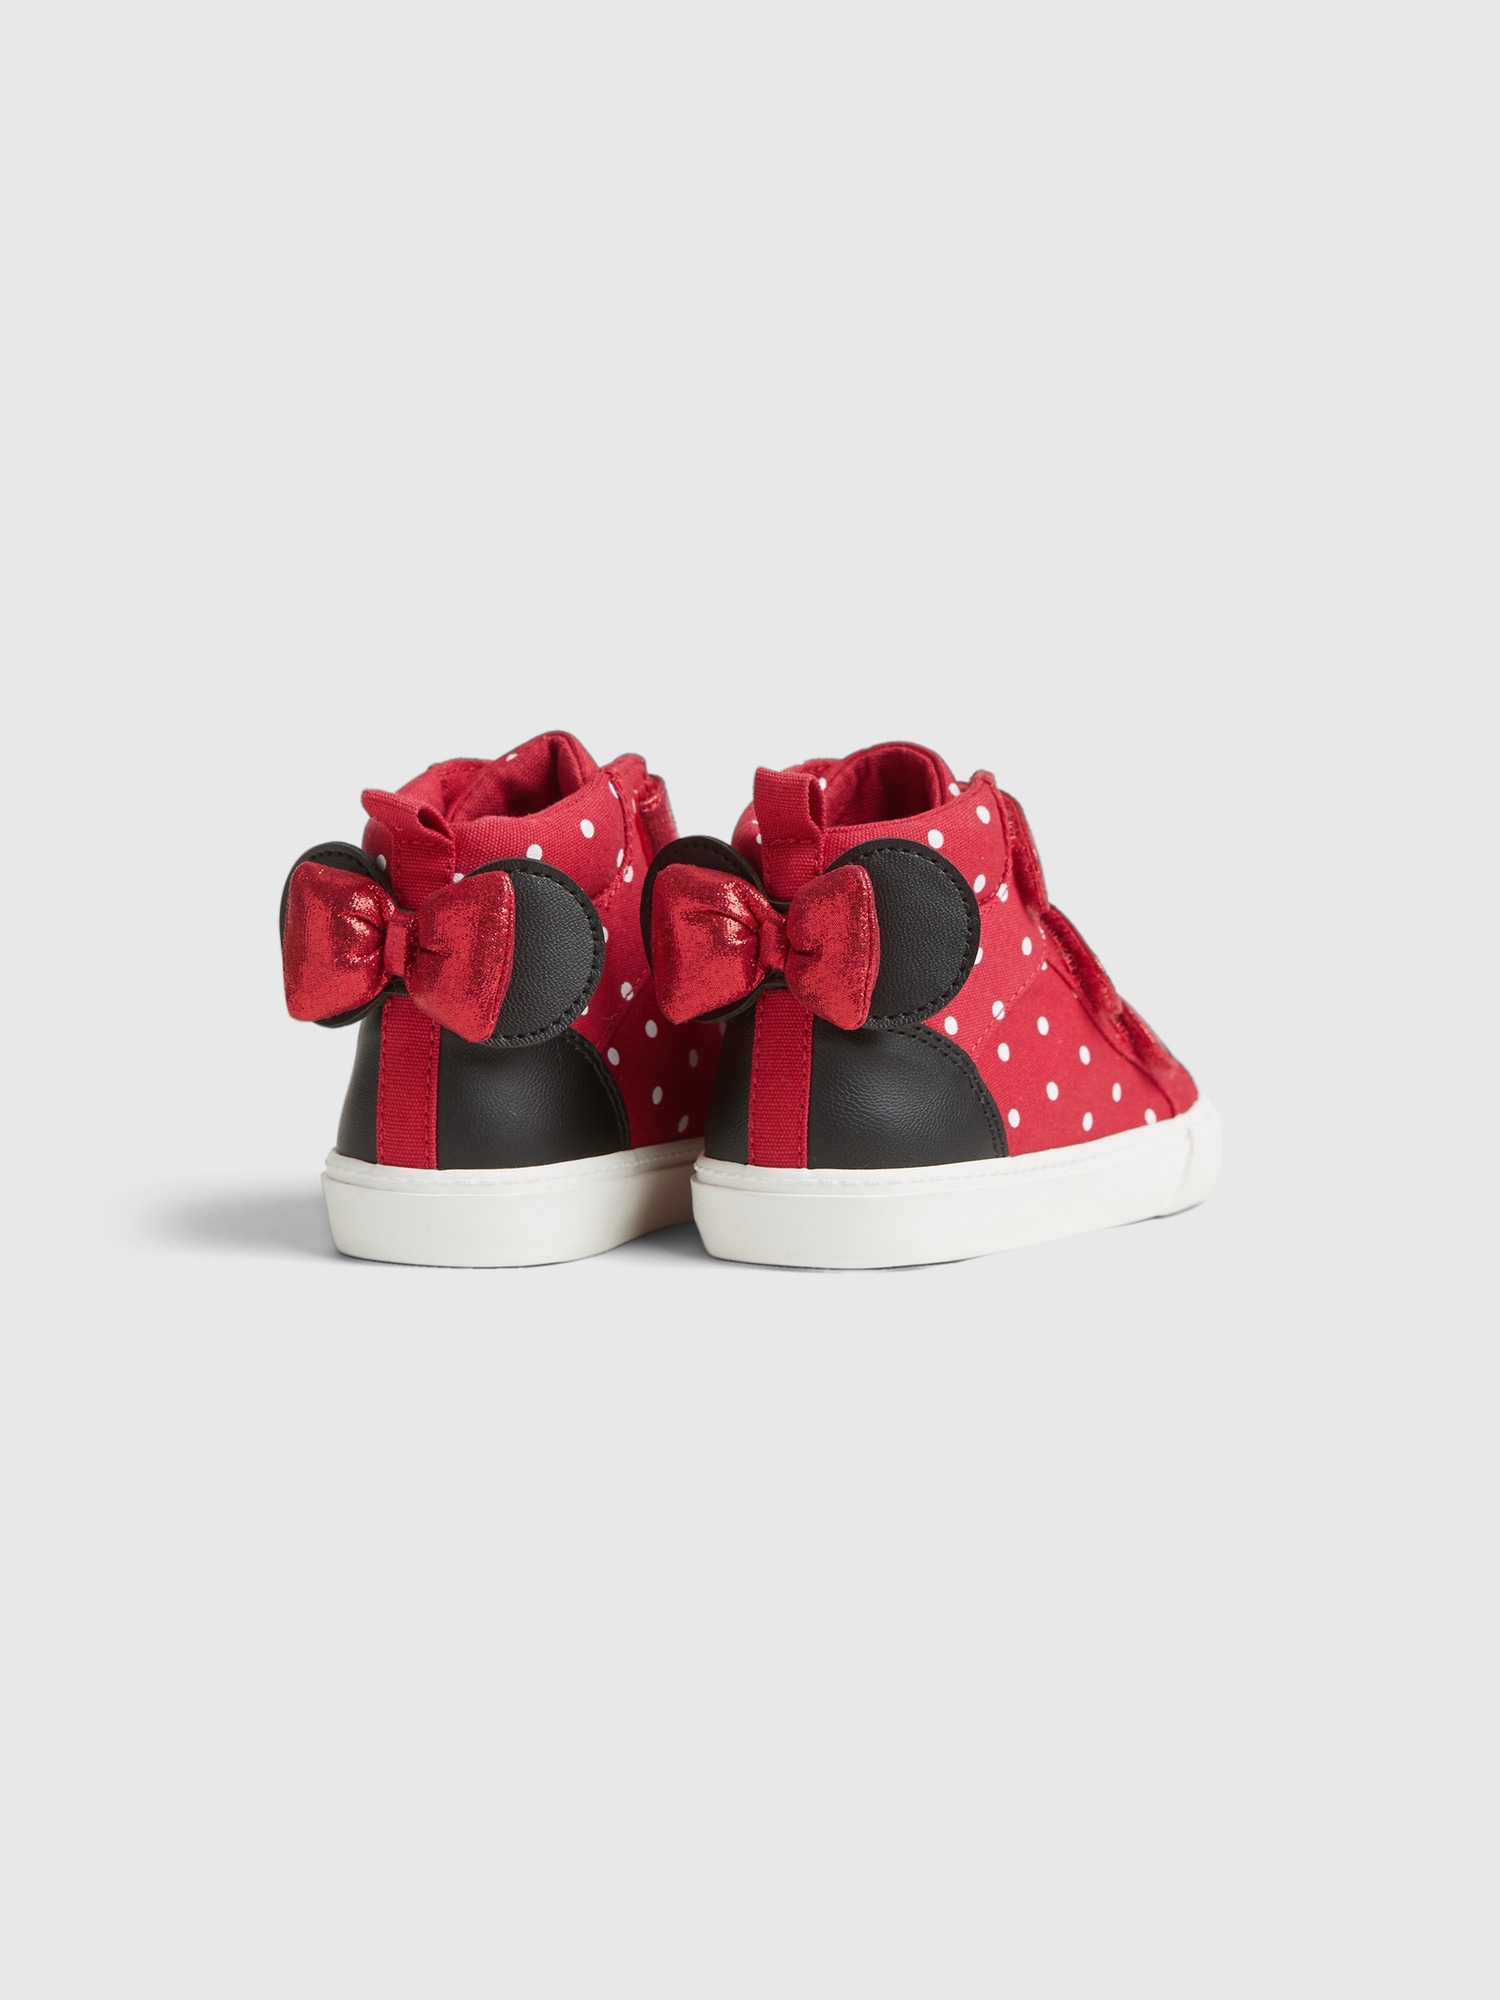 gap mickey mouse shoes